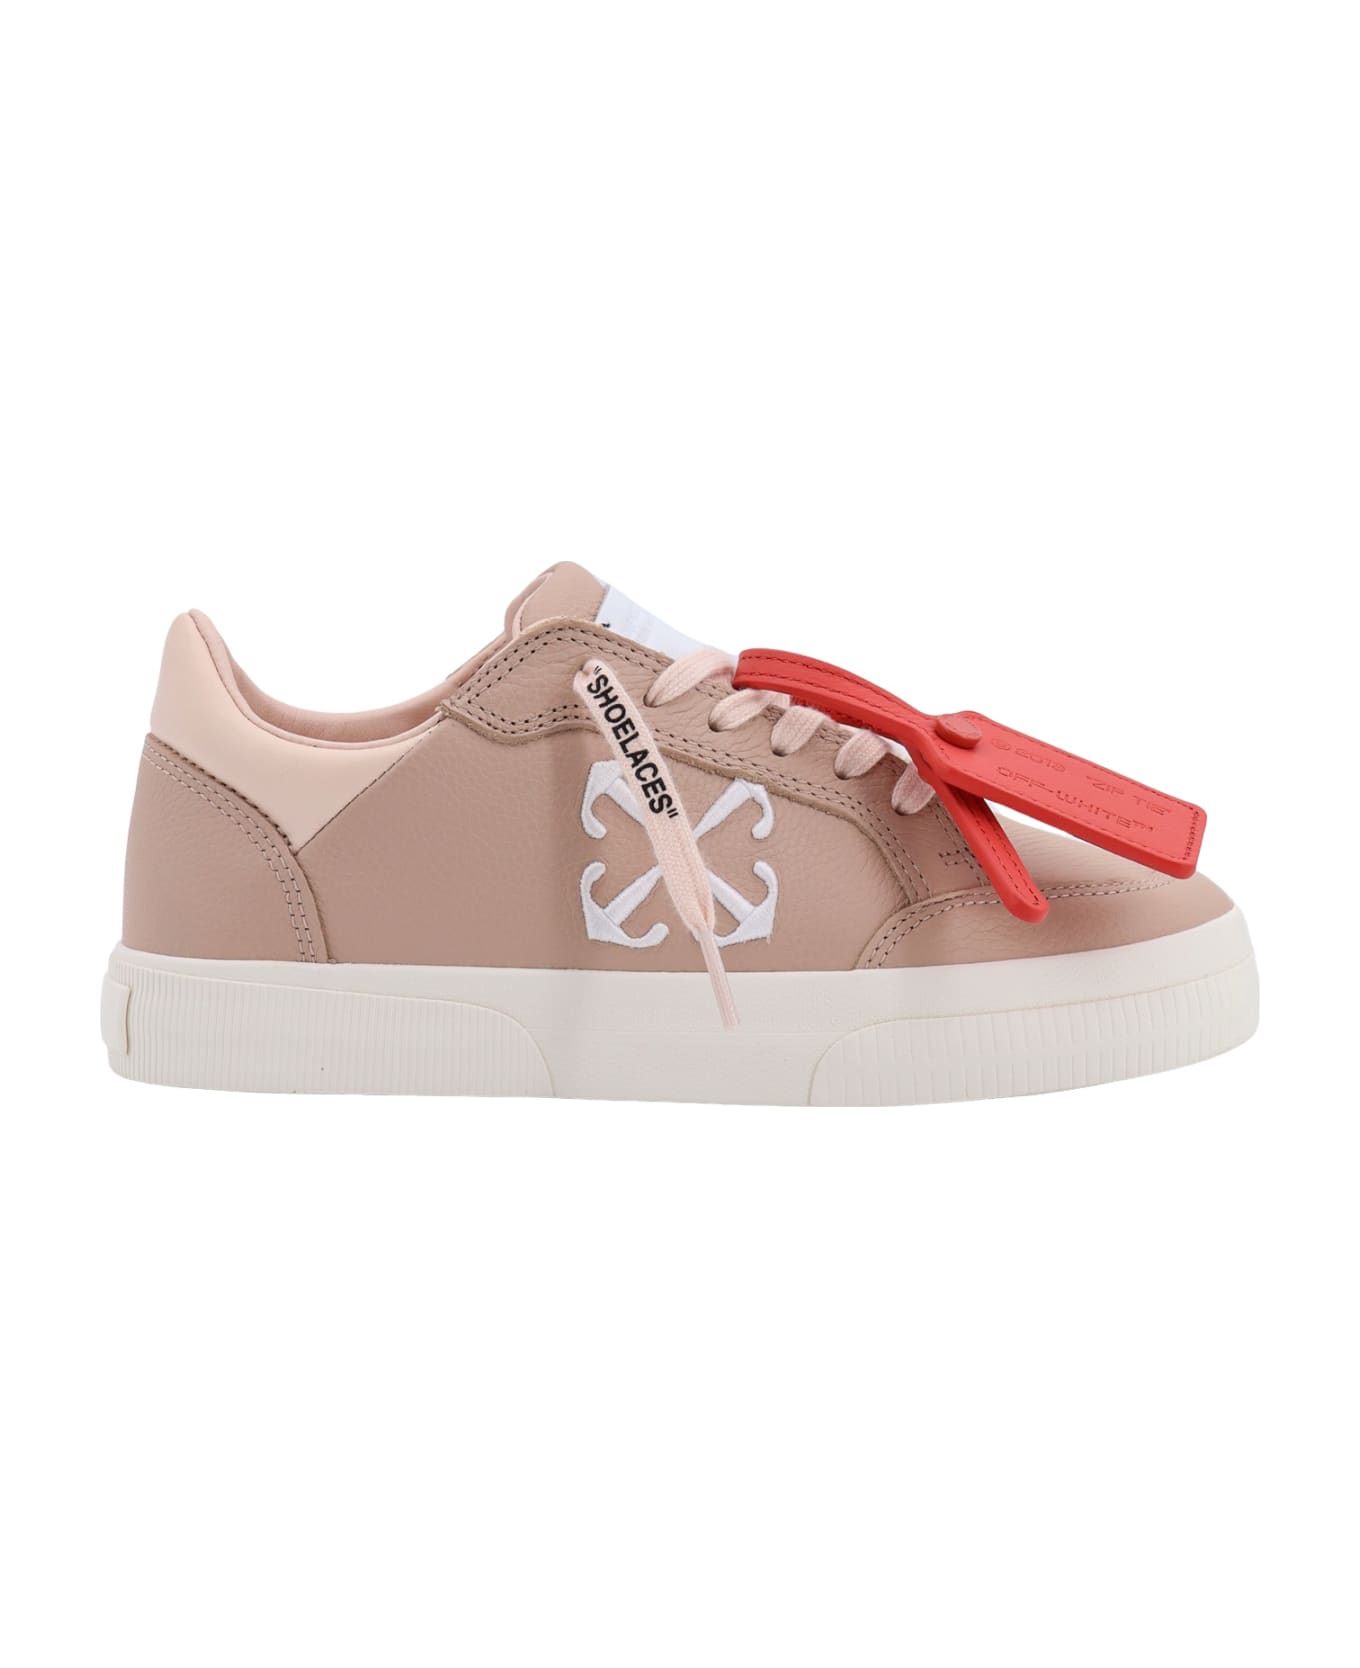 Off-White Vulcanized Sneakers - Pink